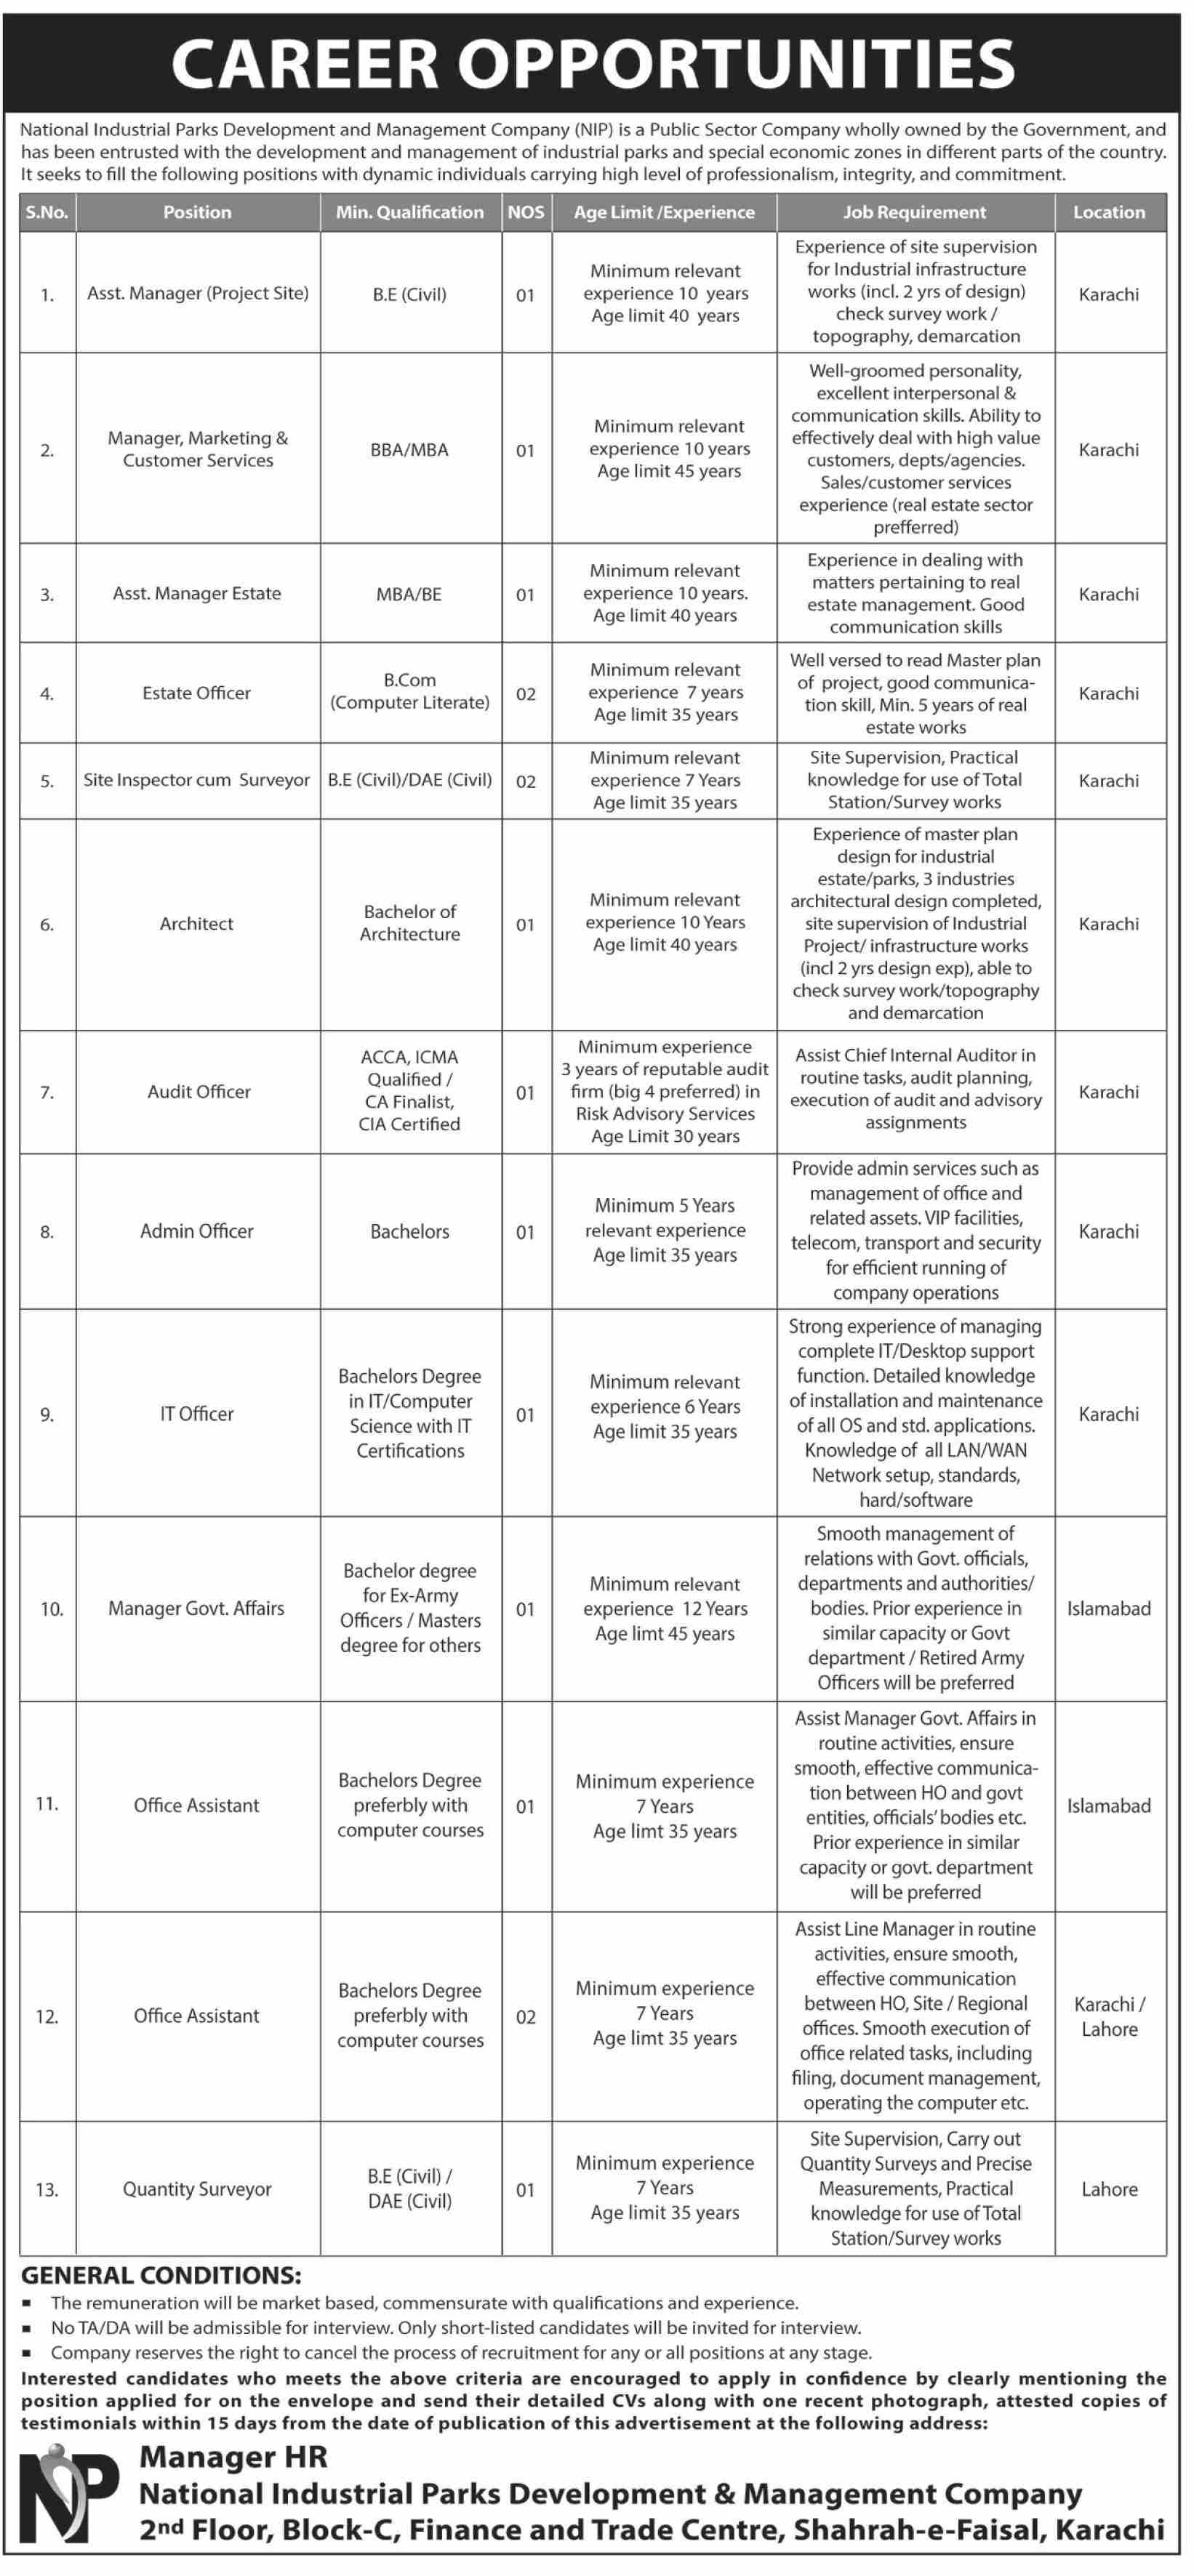 National Industrial Parks Development and Management Company (NIP) jobs 2019